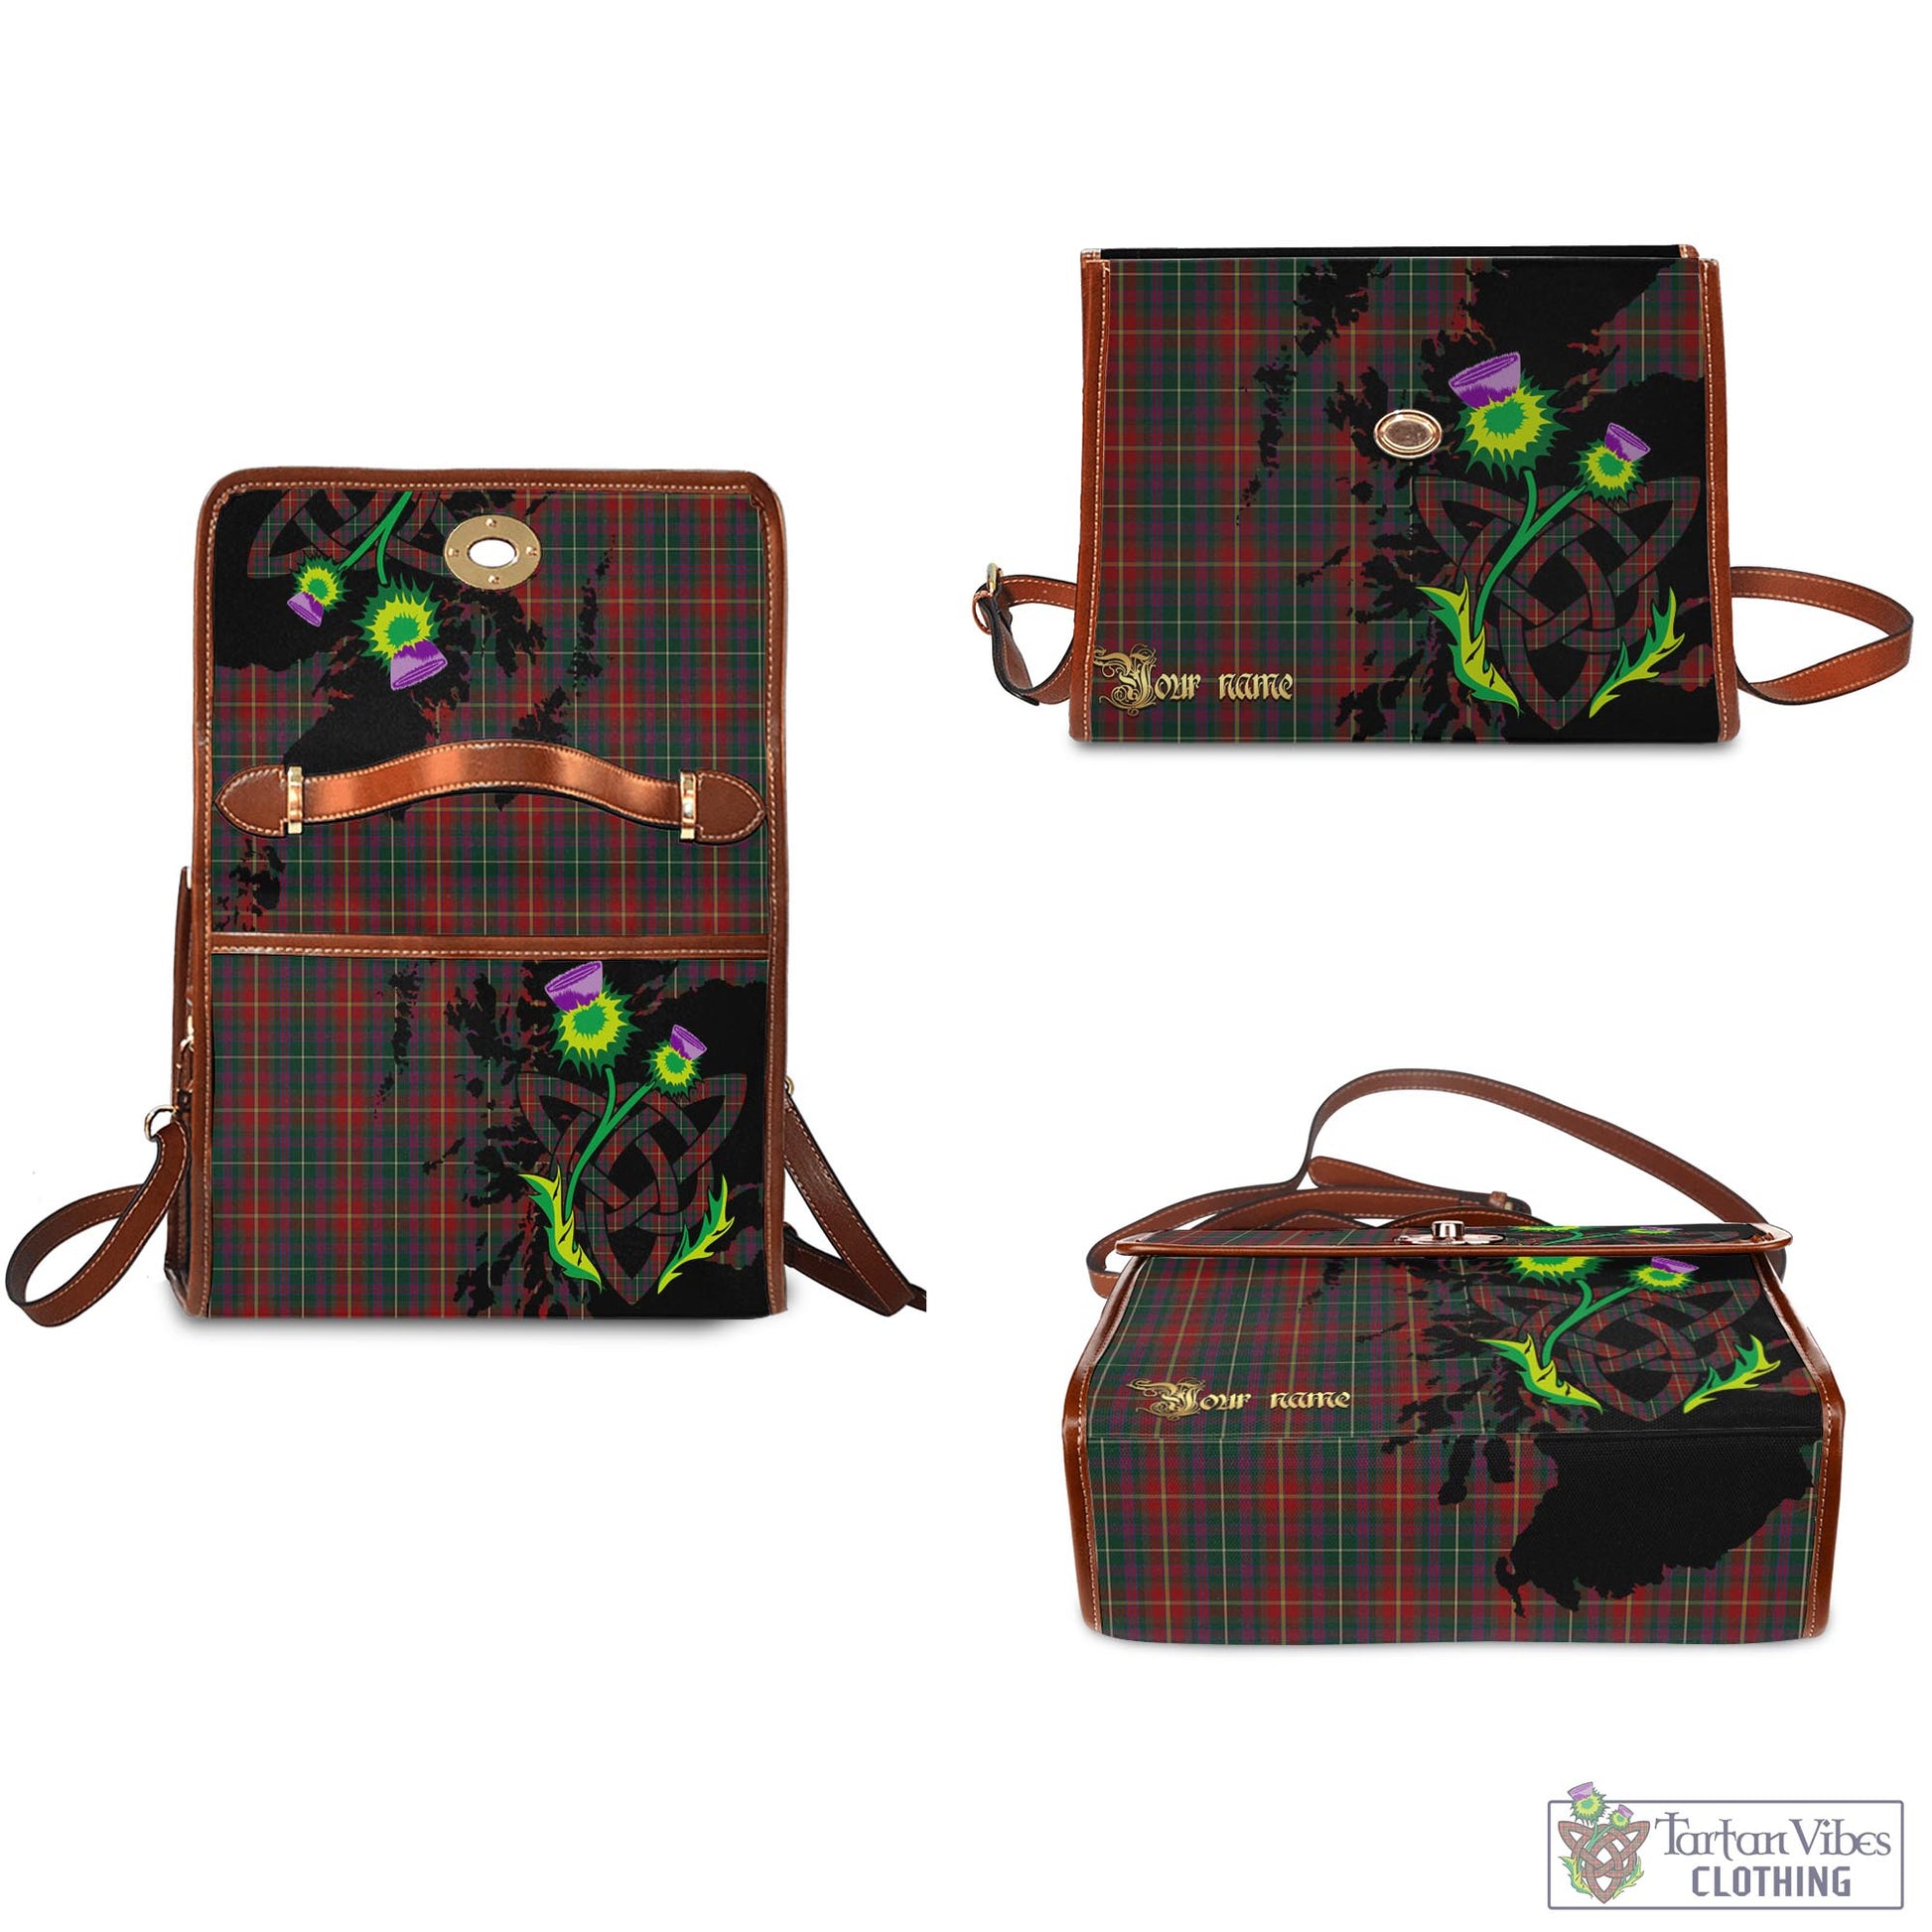 Tartan Vibes Clothing Meath County Ireland Tartan Waterproof Canvas Bag with Scotland Map and Thistle Celtic Accents